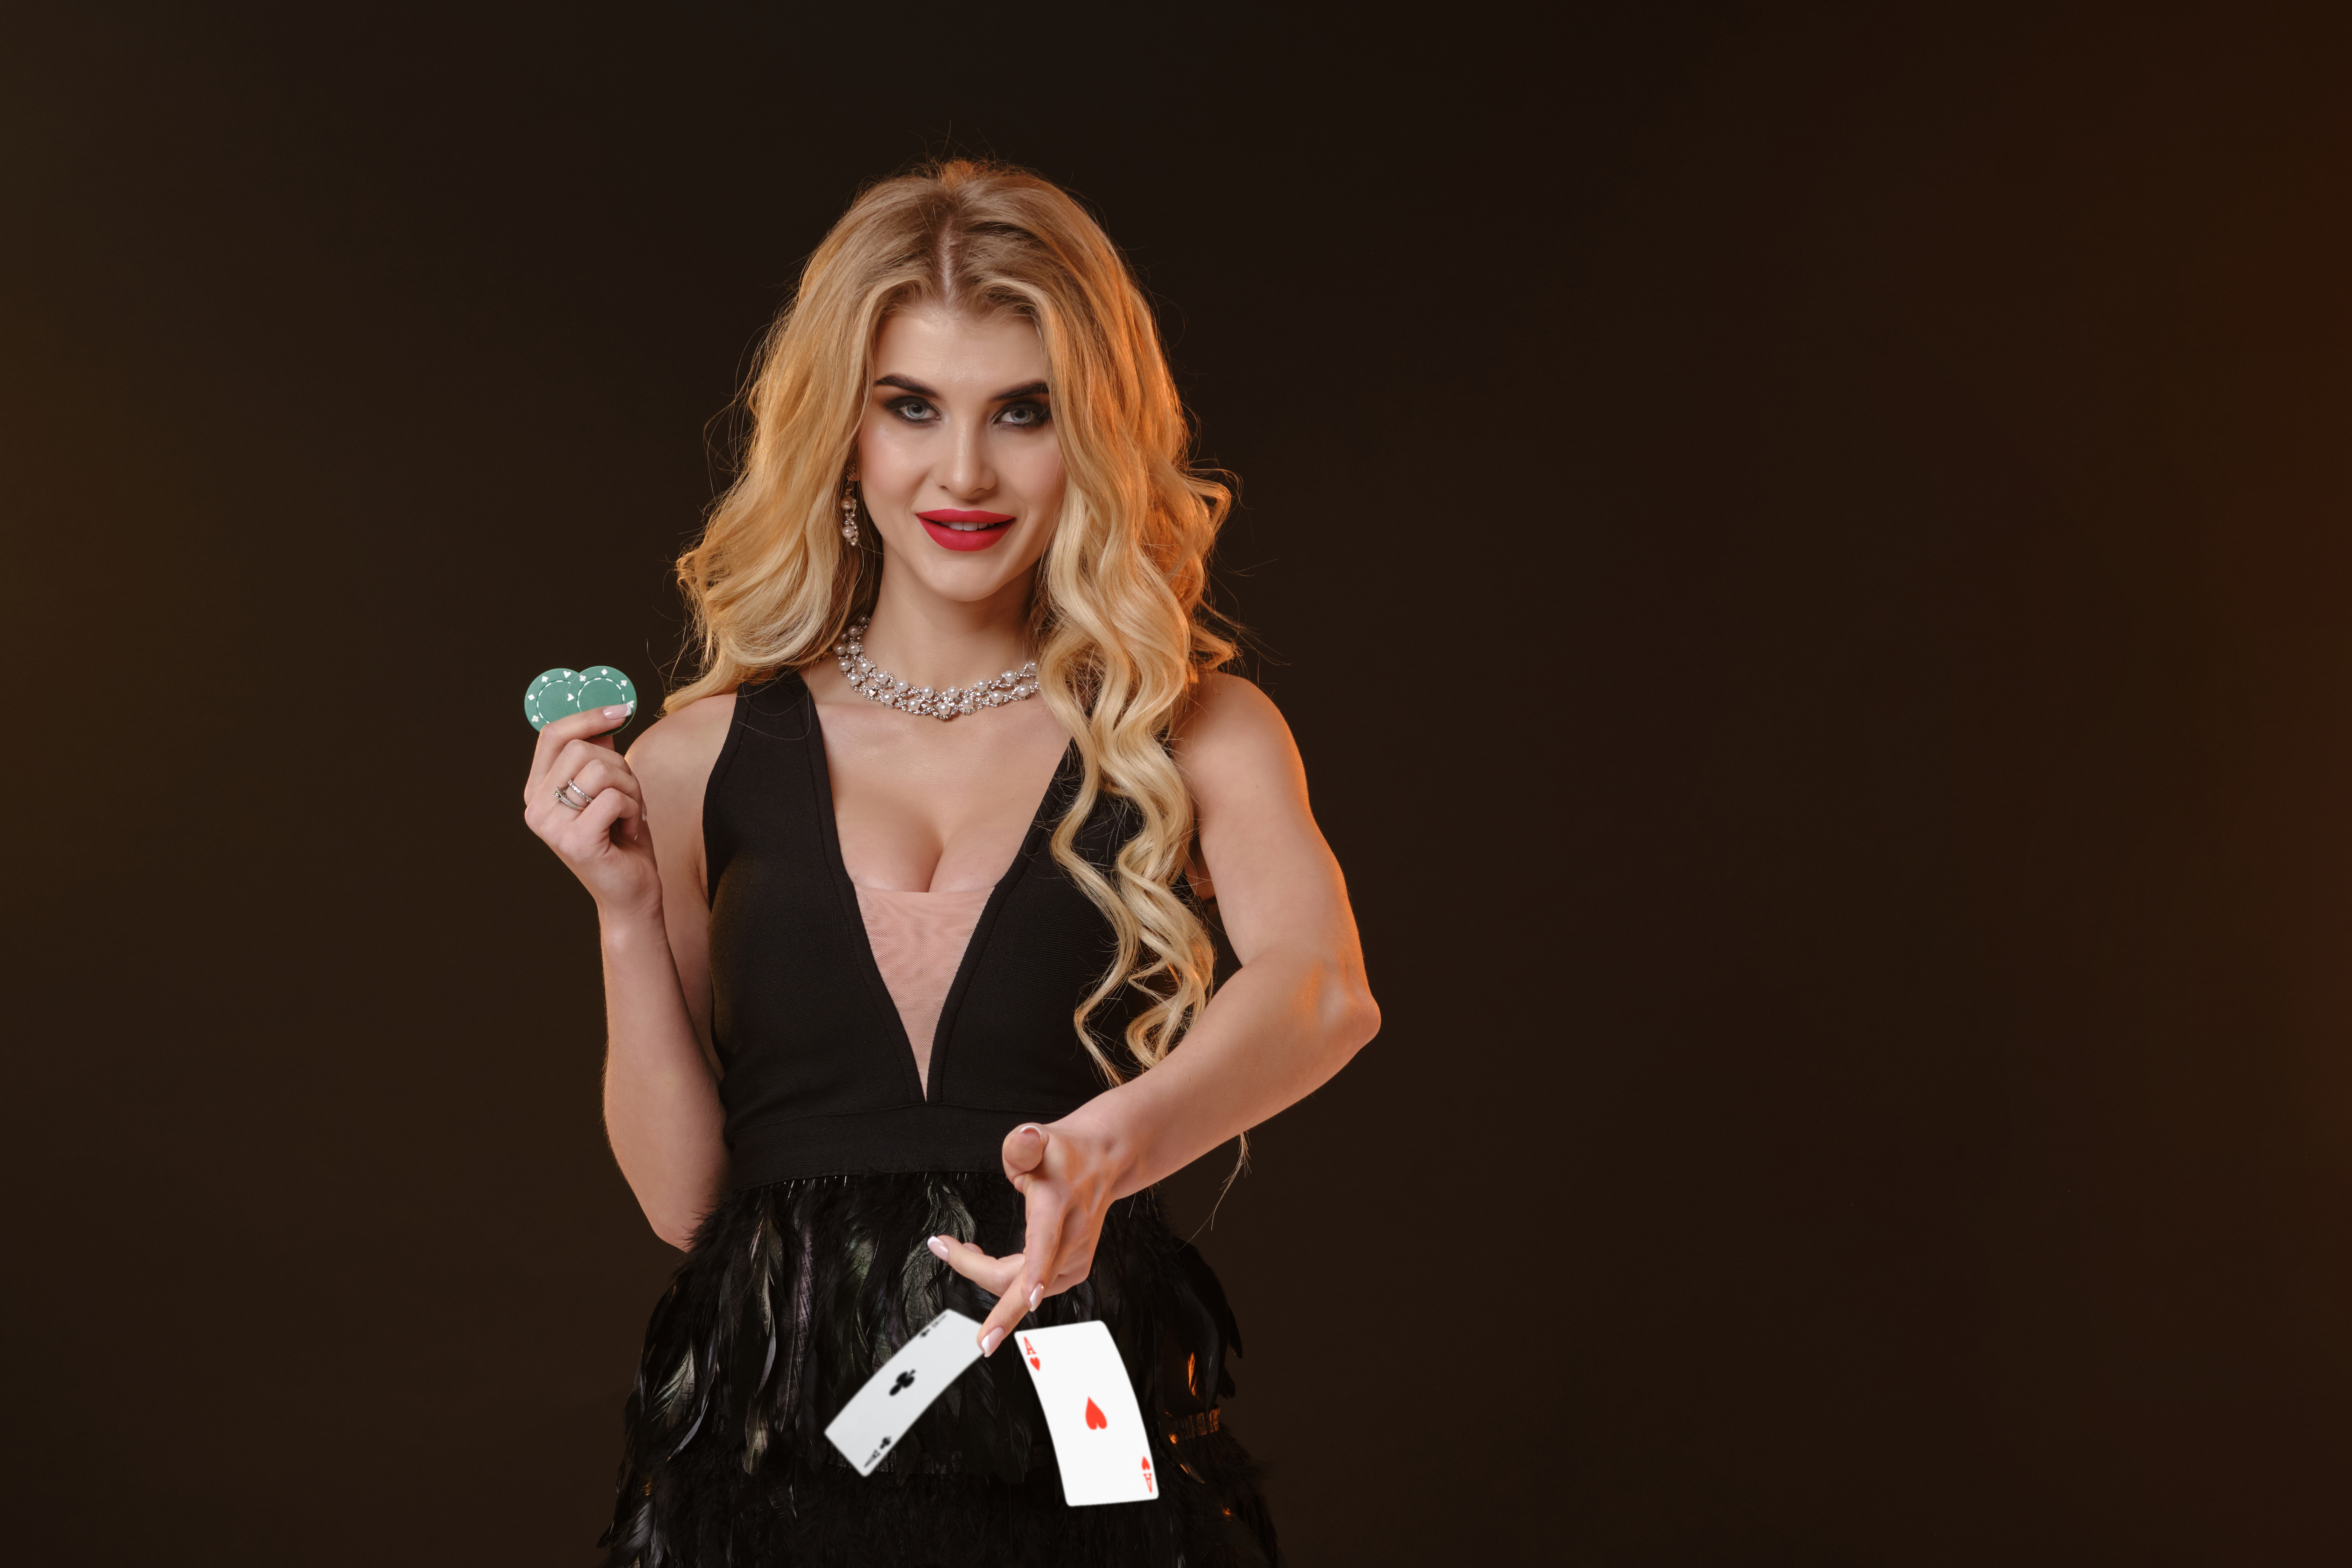 Blonde girl in black dress and necklace. Smiling, showing two green chips, throwing something, posing on brown background. Poker, casino. Close-up